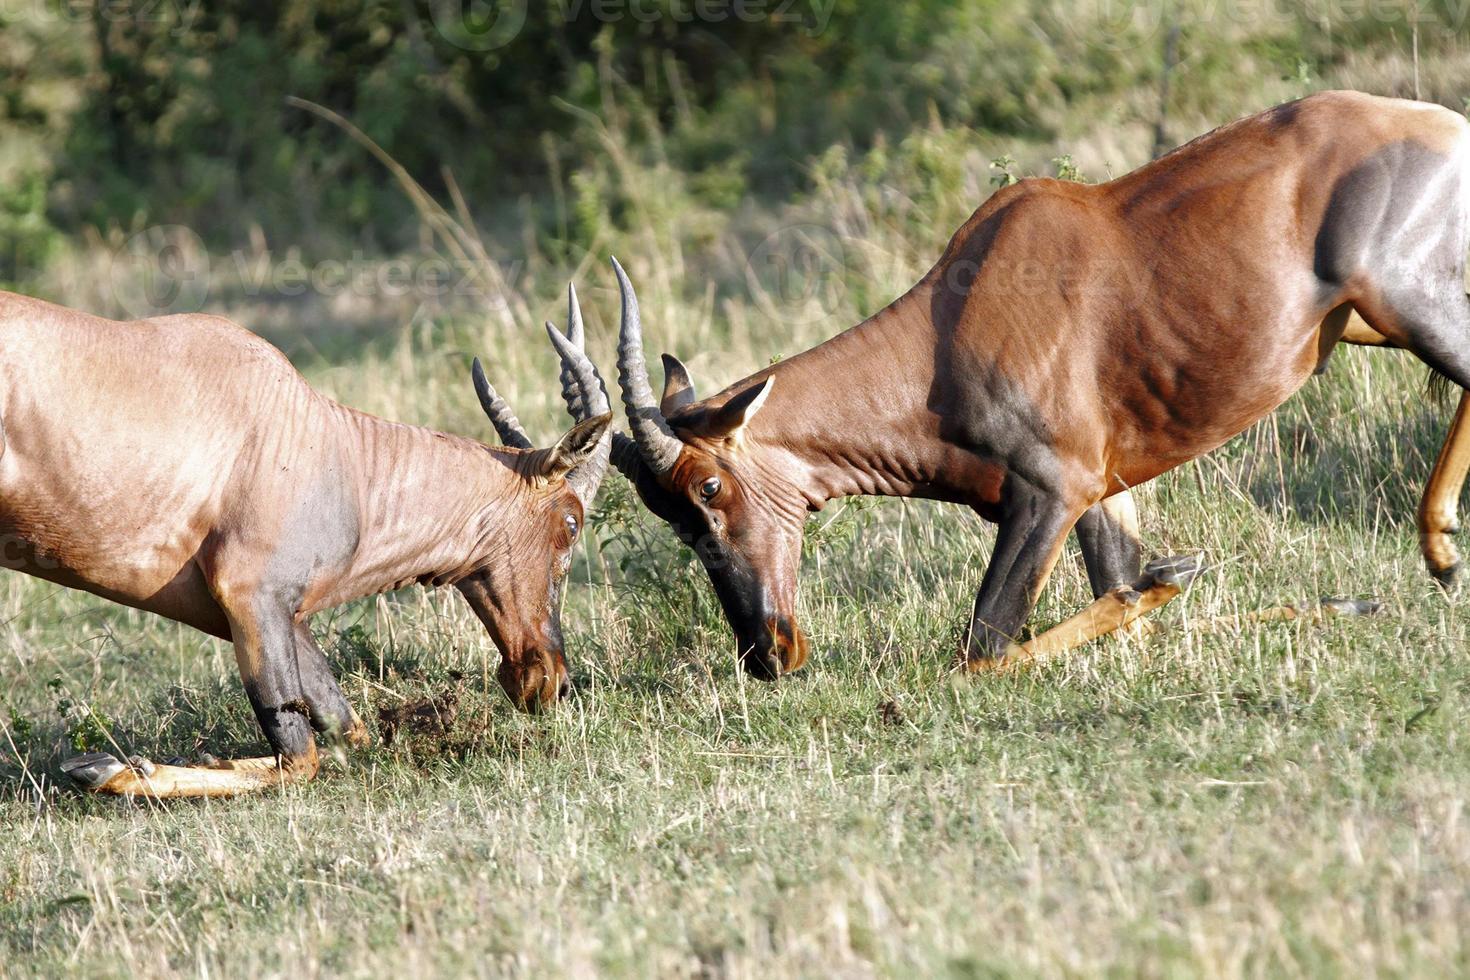 Fight between two Topi antelopes photo